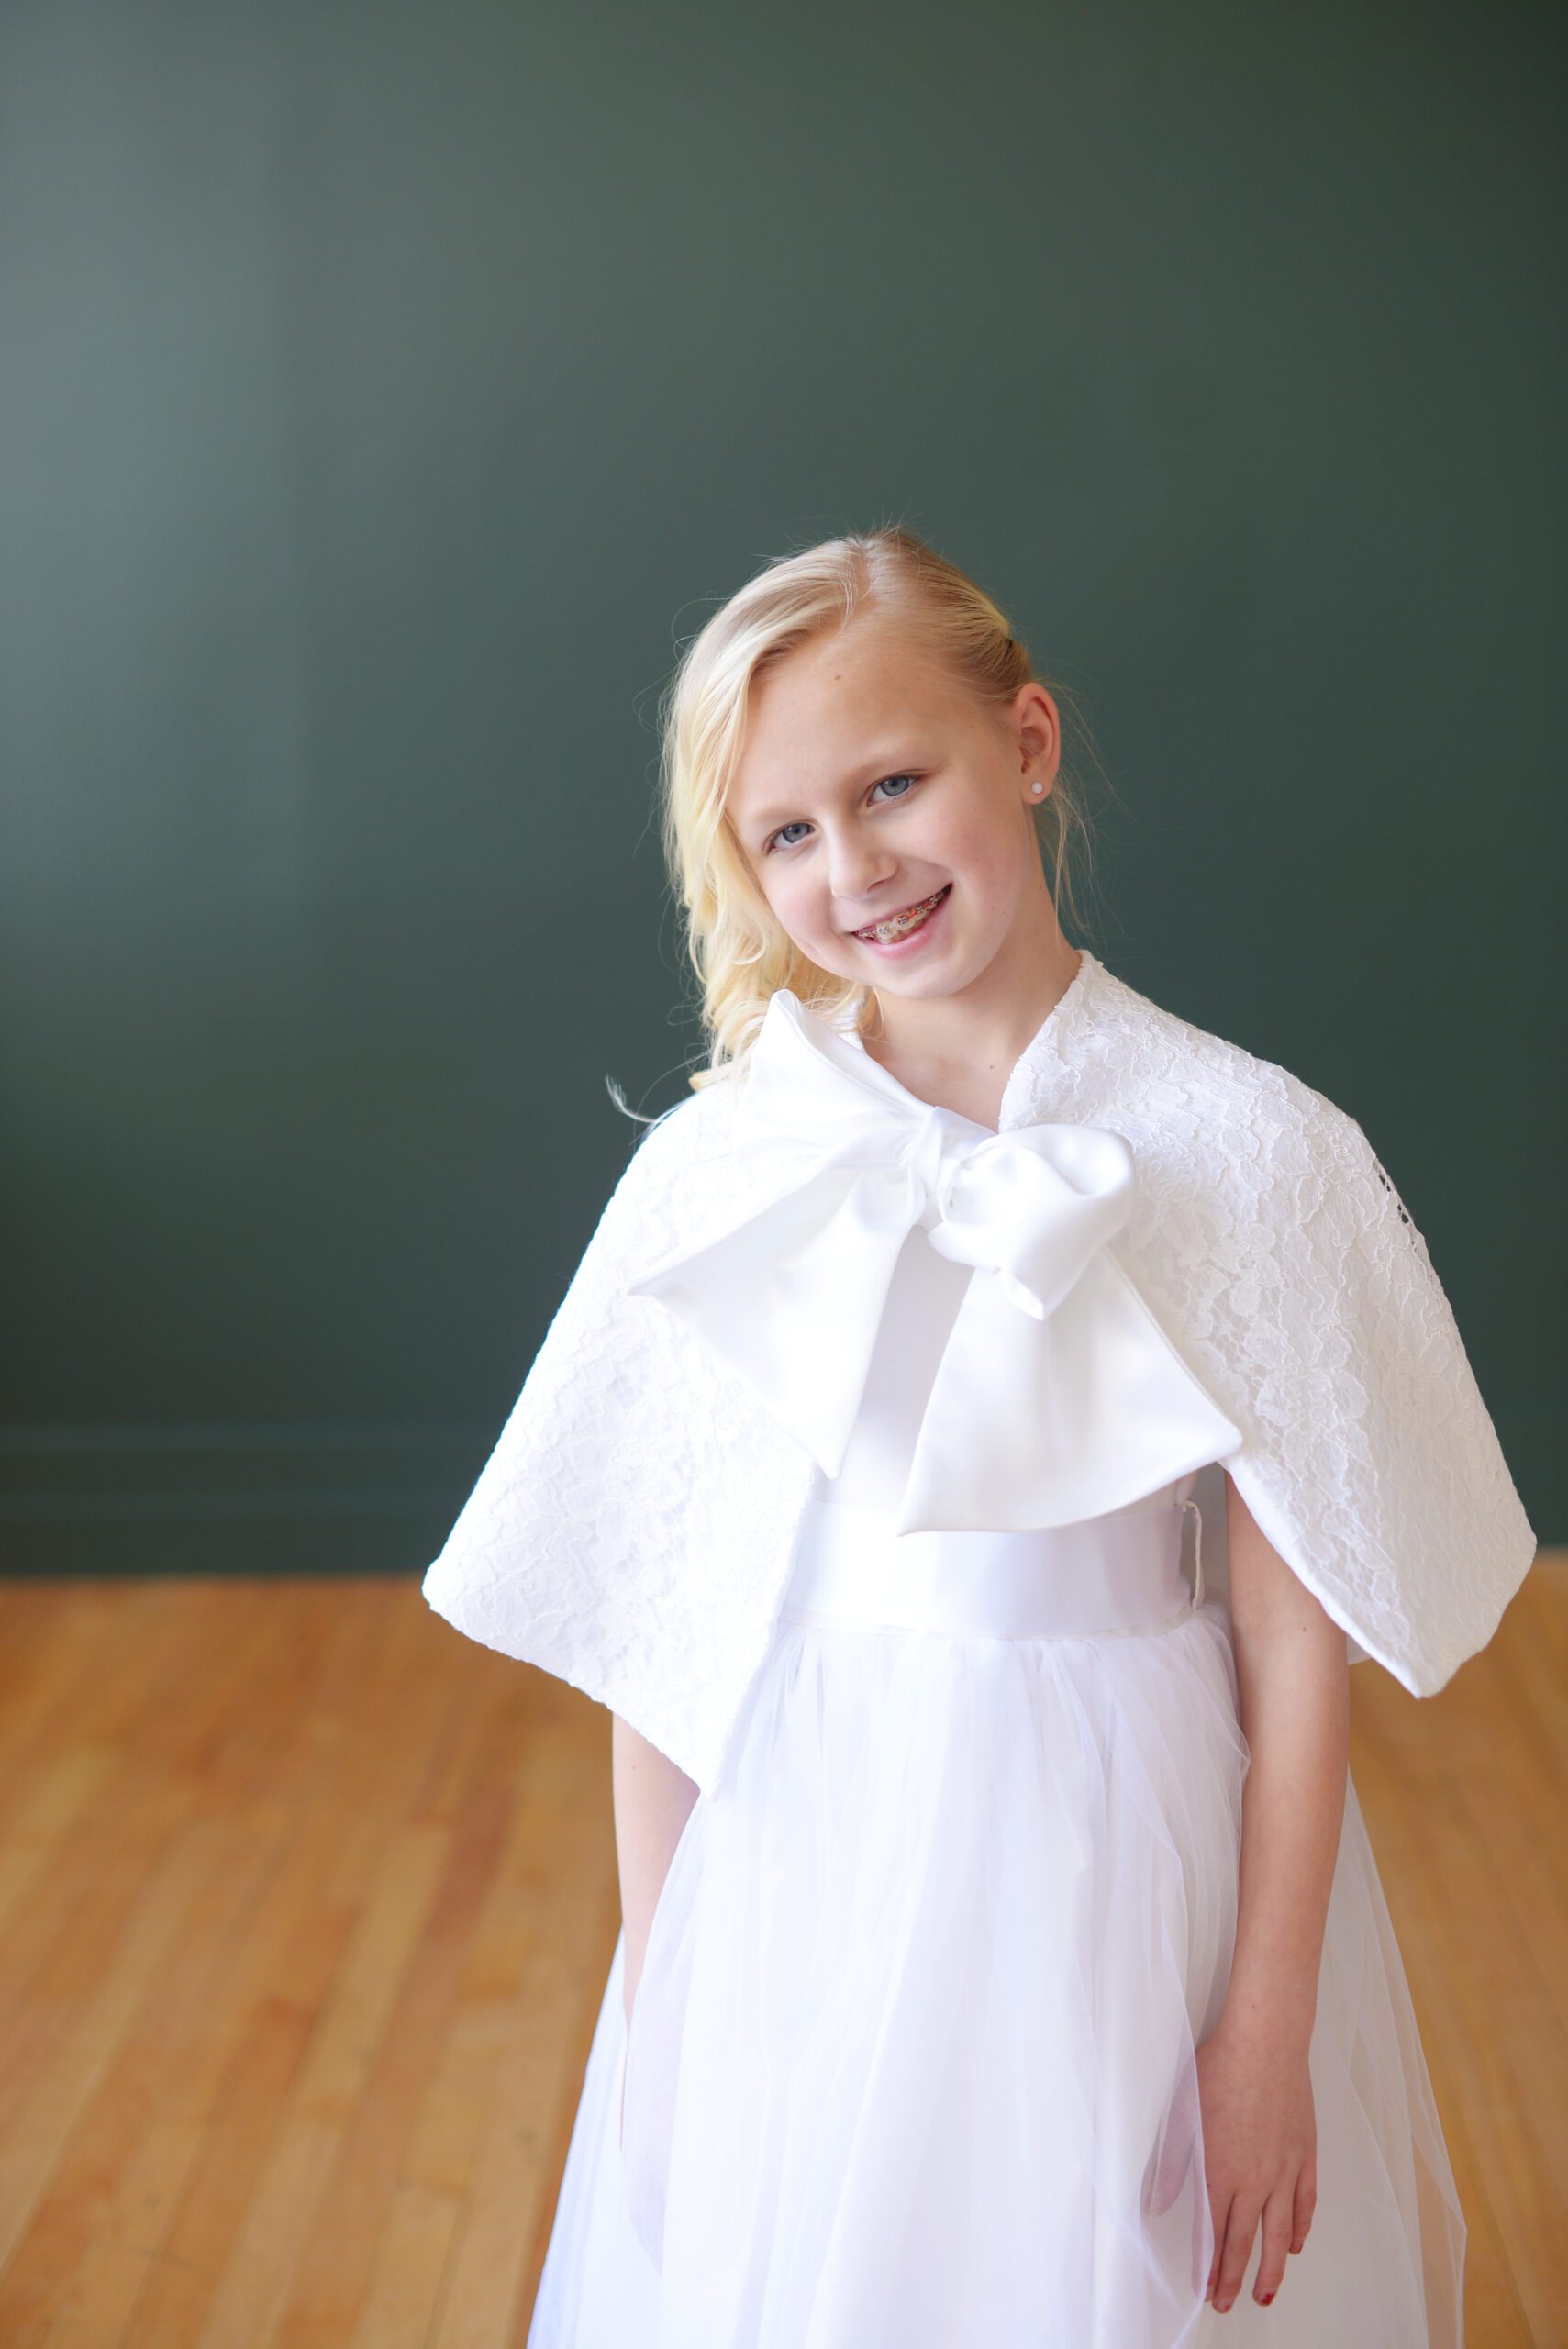 A photo of a girl in a first communion dress with a lace cape for warmth